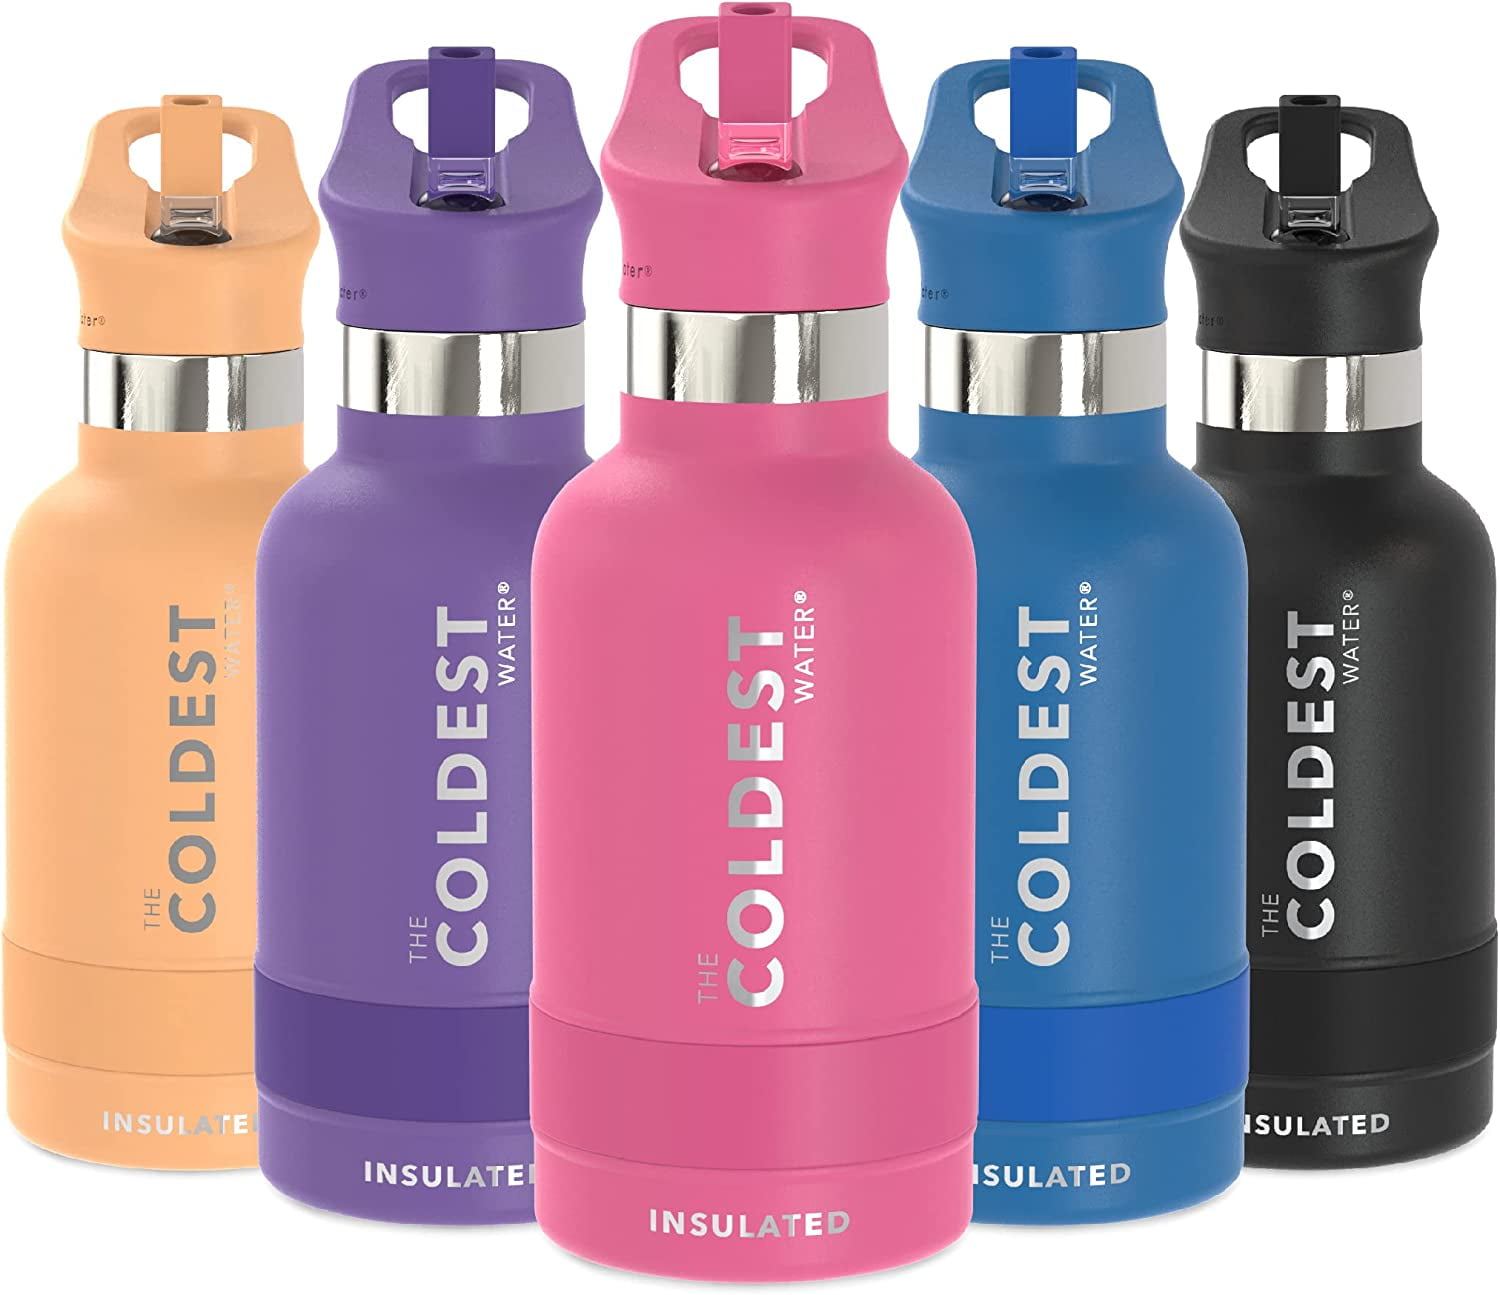 What's So Special About Coldest Water Bottle? How The Coldest Water Bottle  so popular?